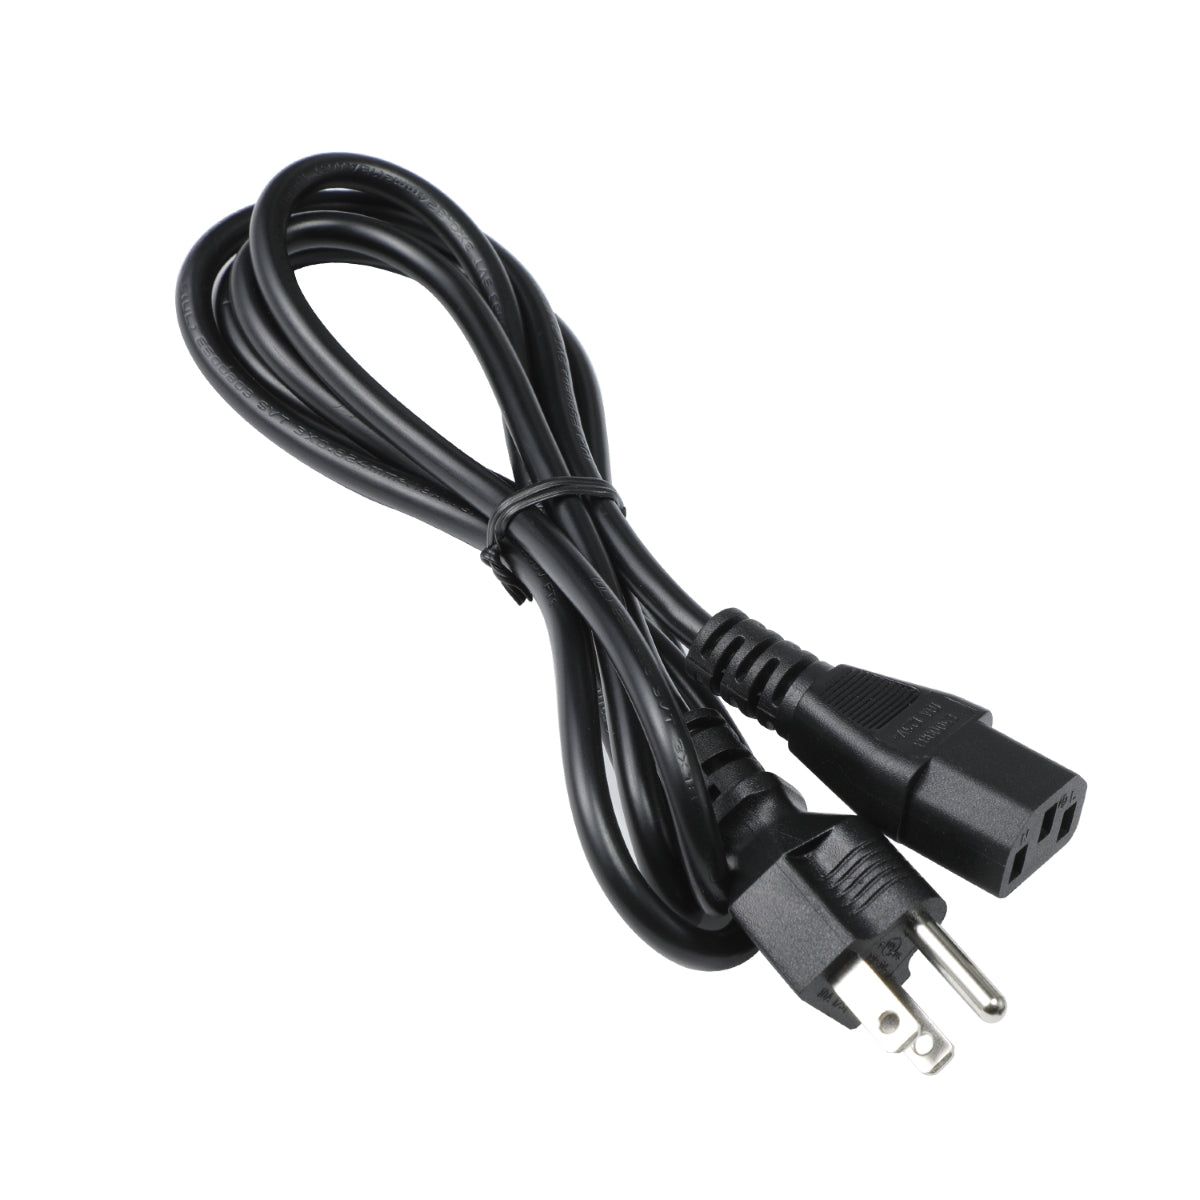 Power Cord for Acer AOPEN 32HC1QUR Pbidpx Monitor